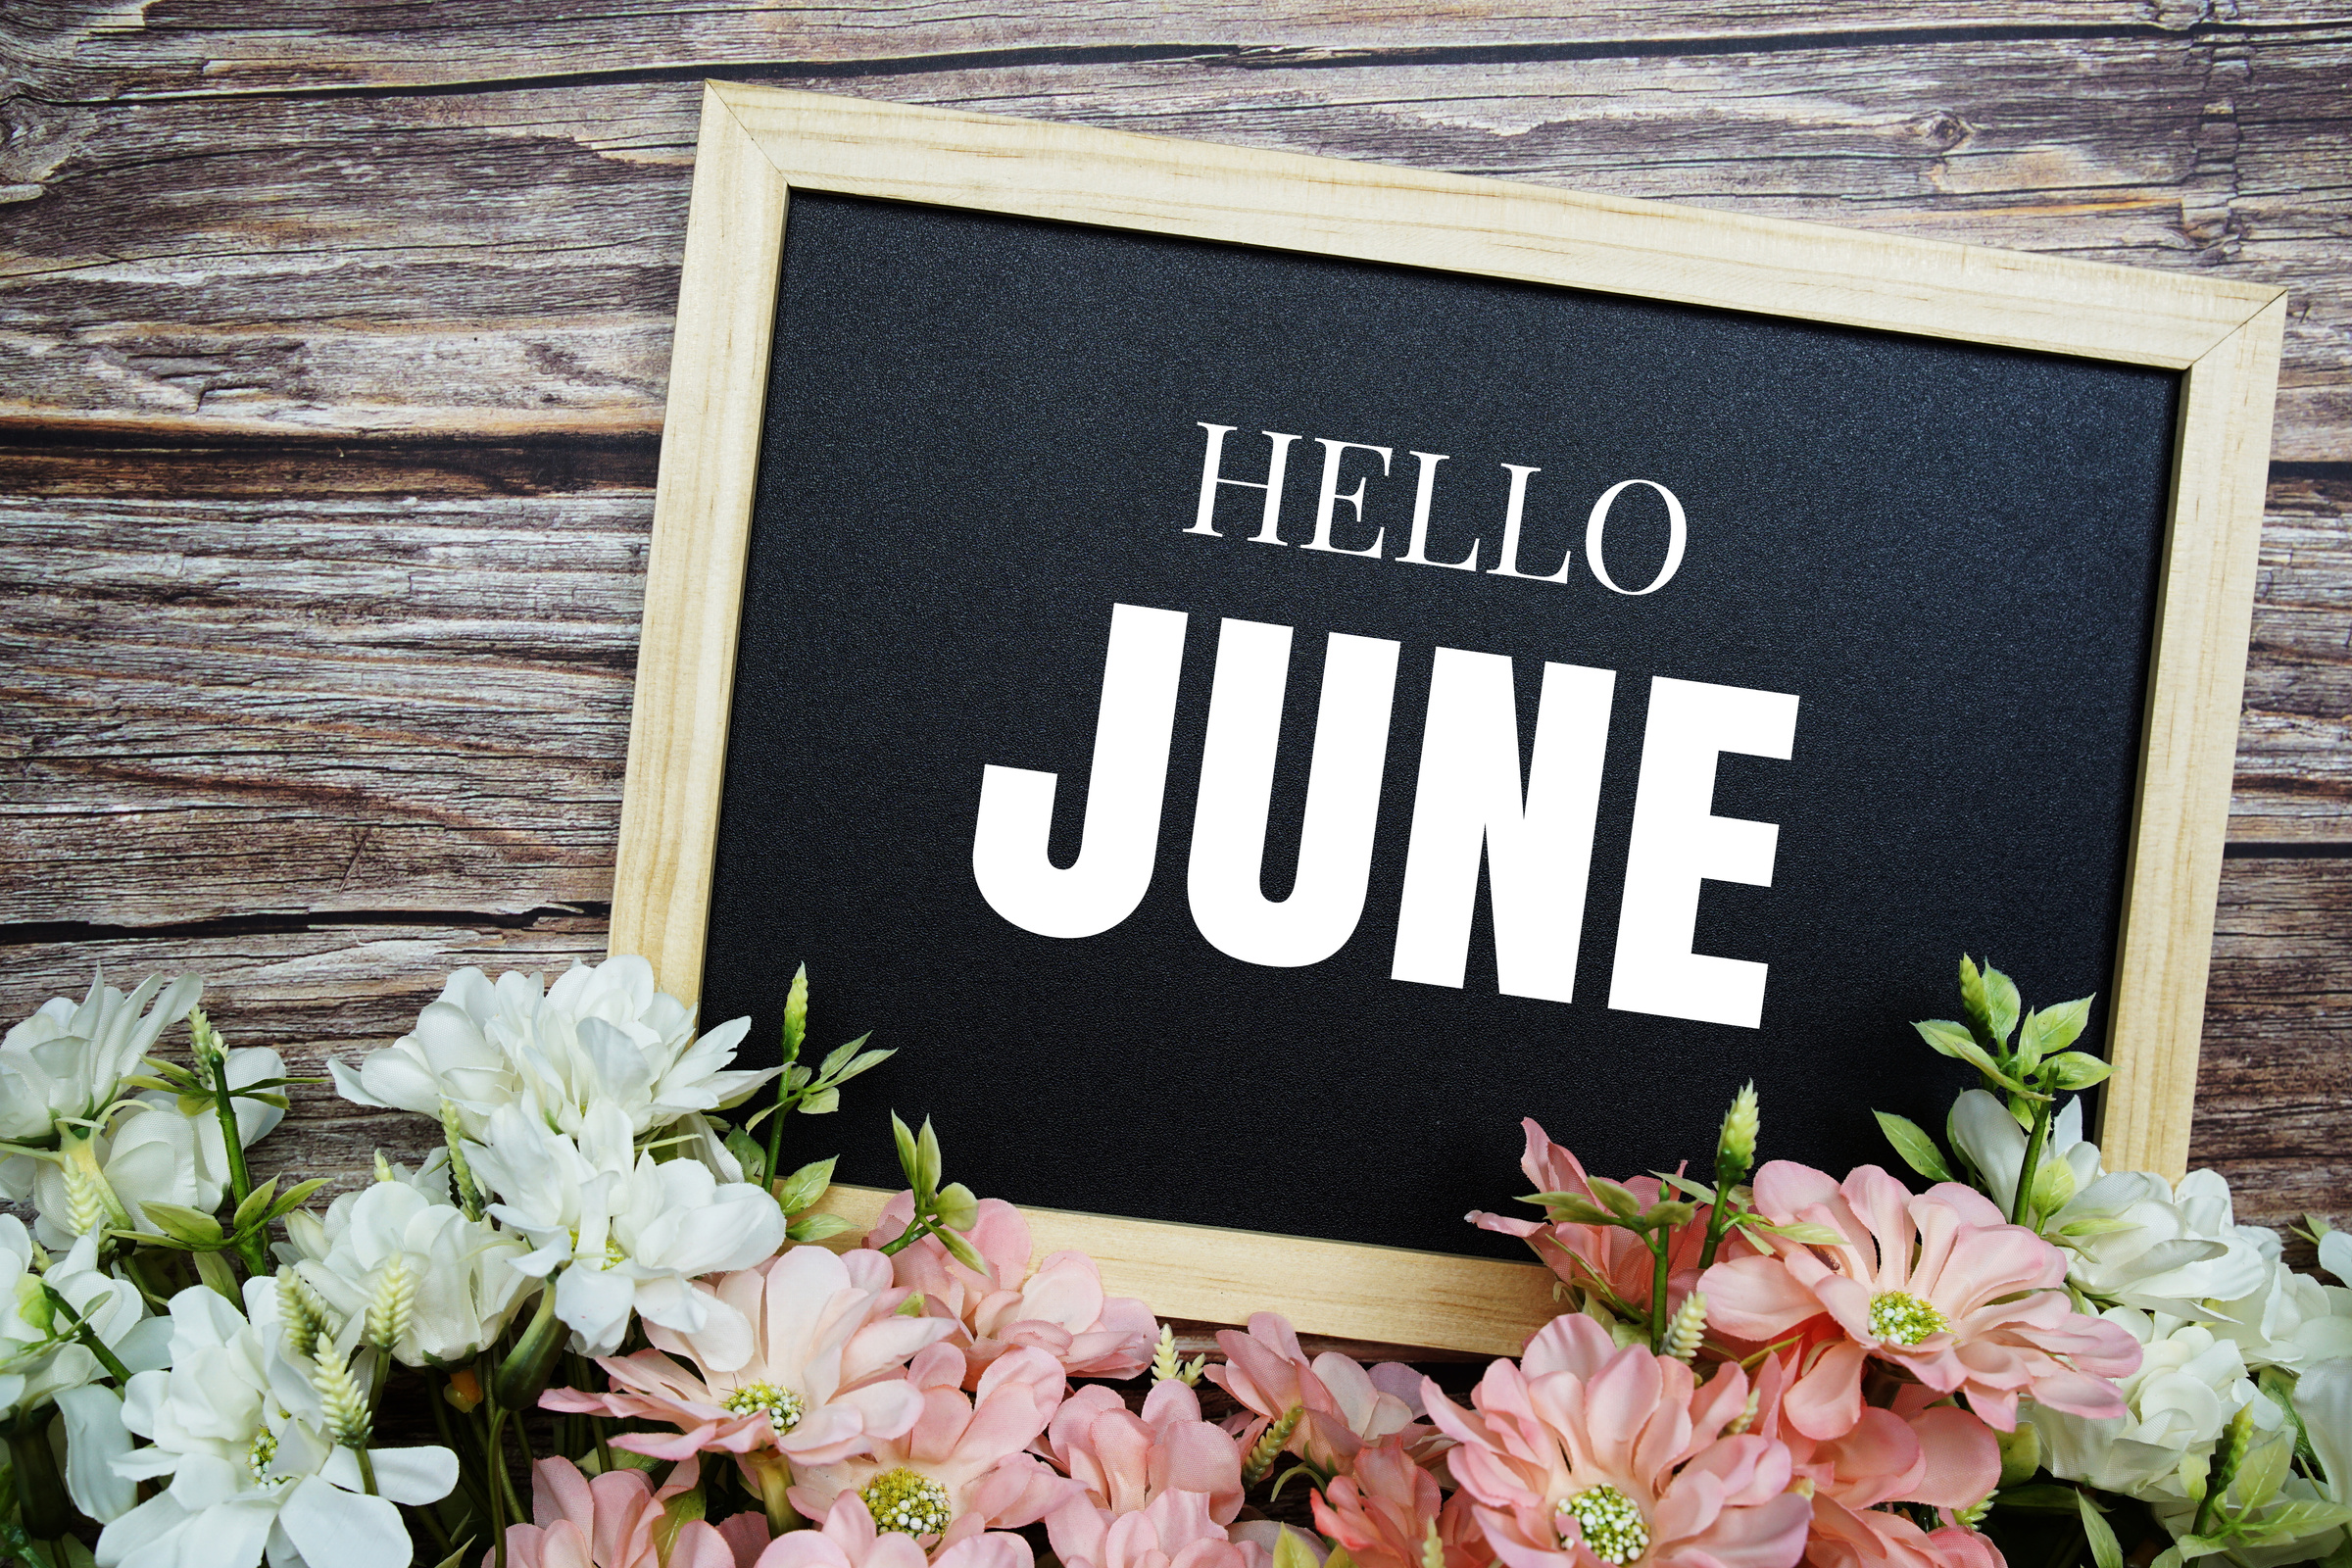 Hello June typography text written on wooden blackboard with flower bouquet decorate on wooden background